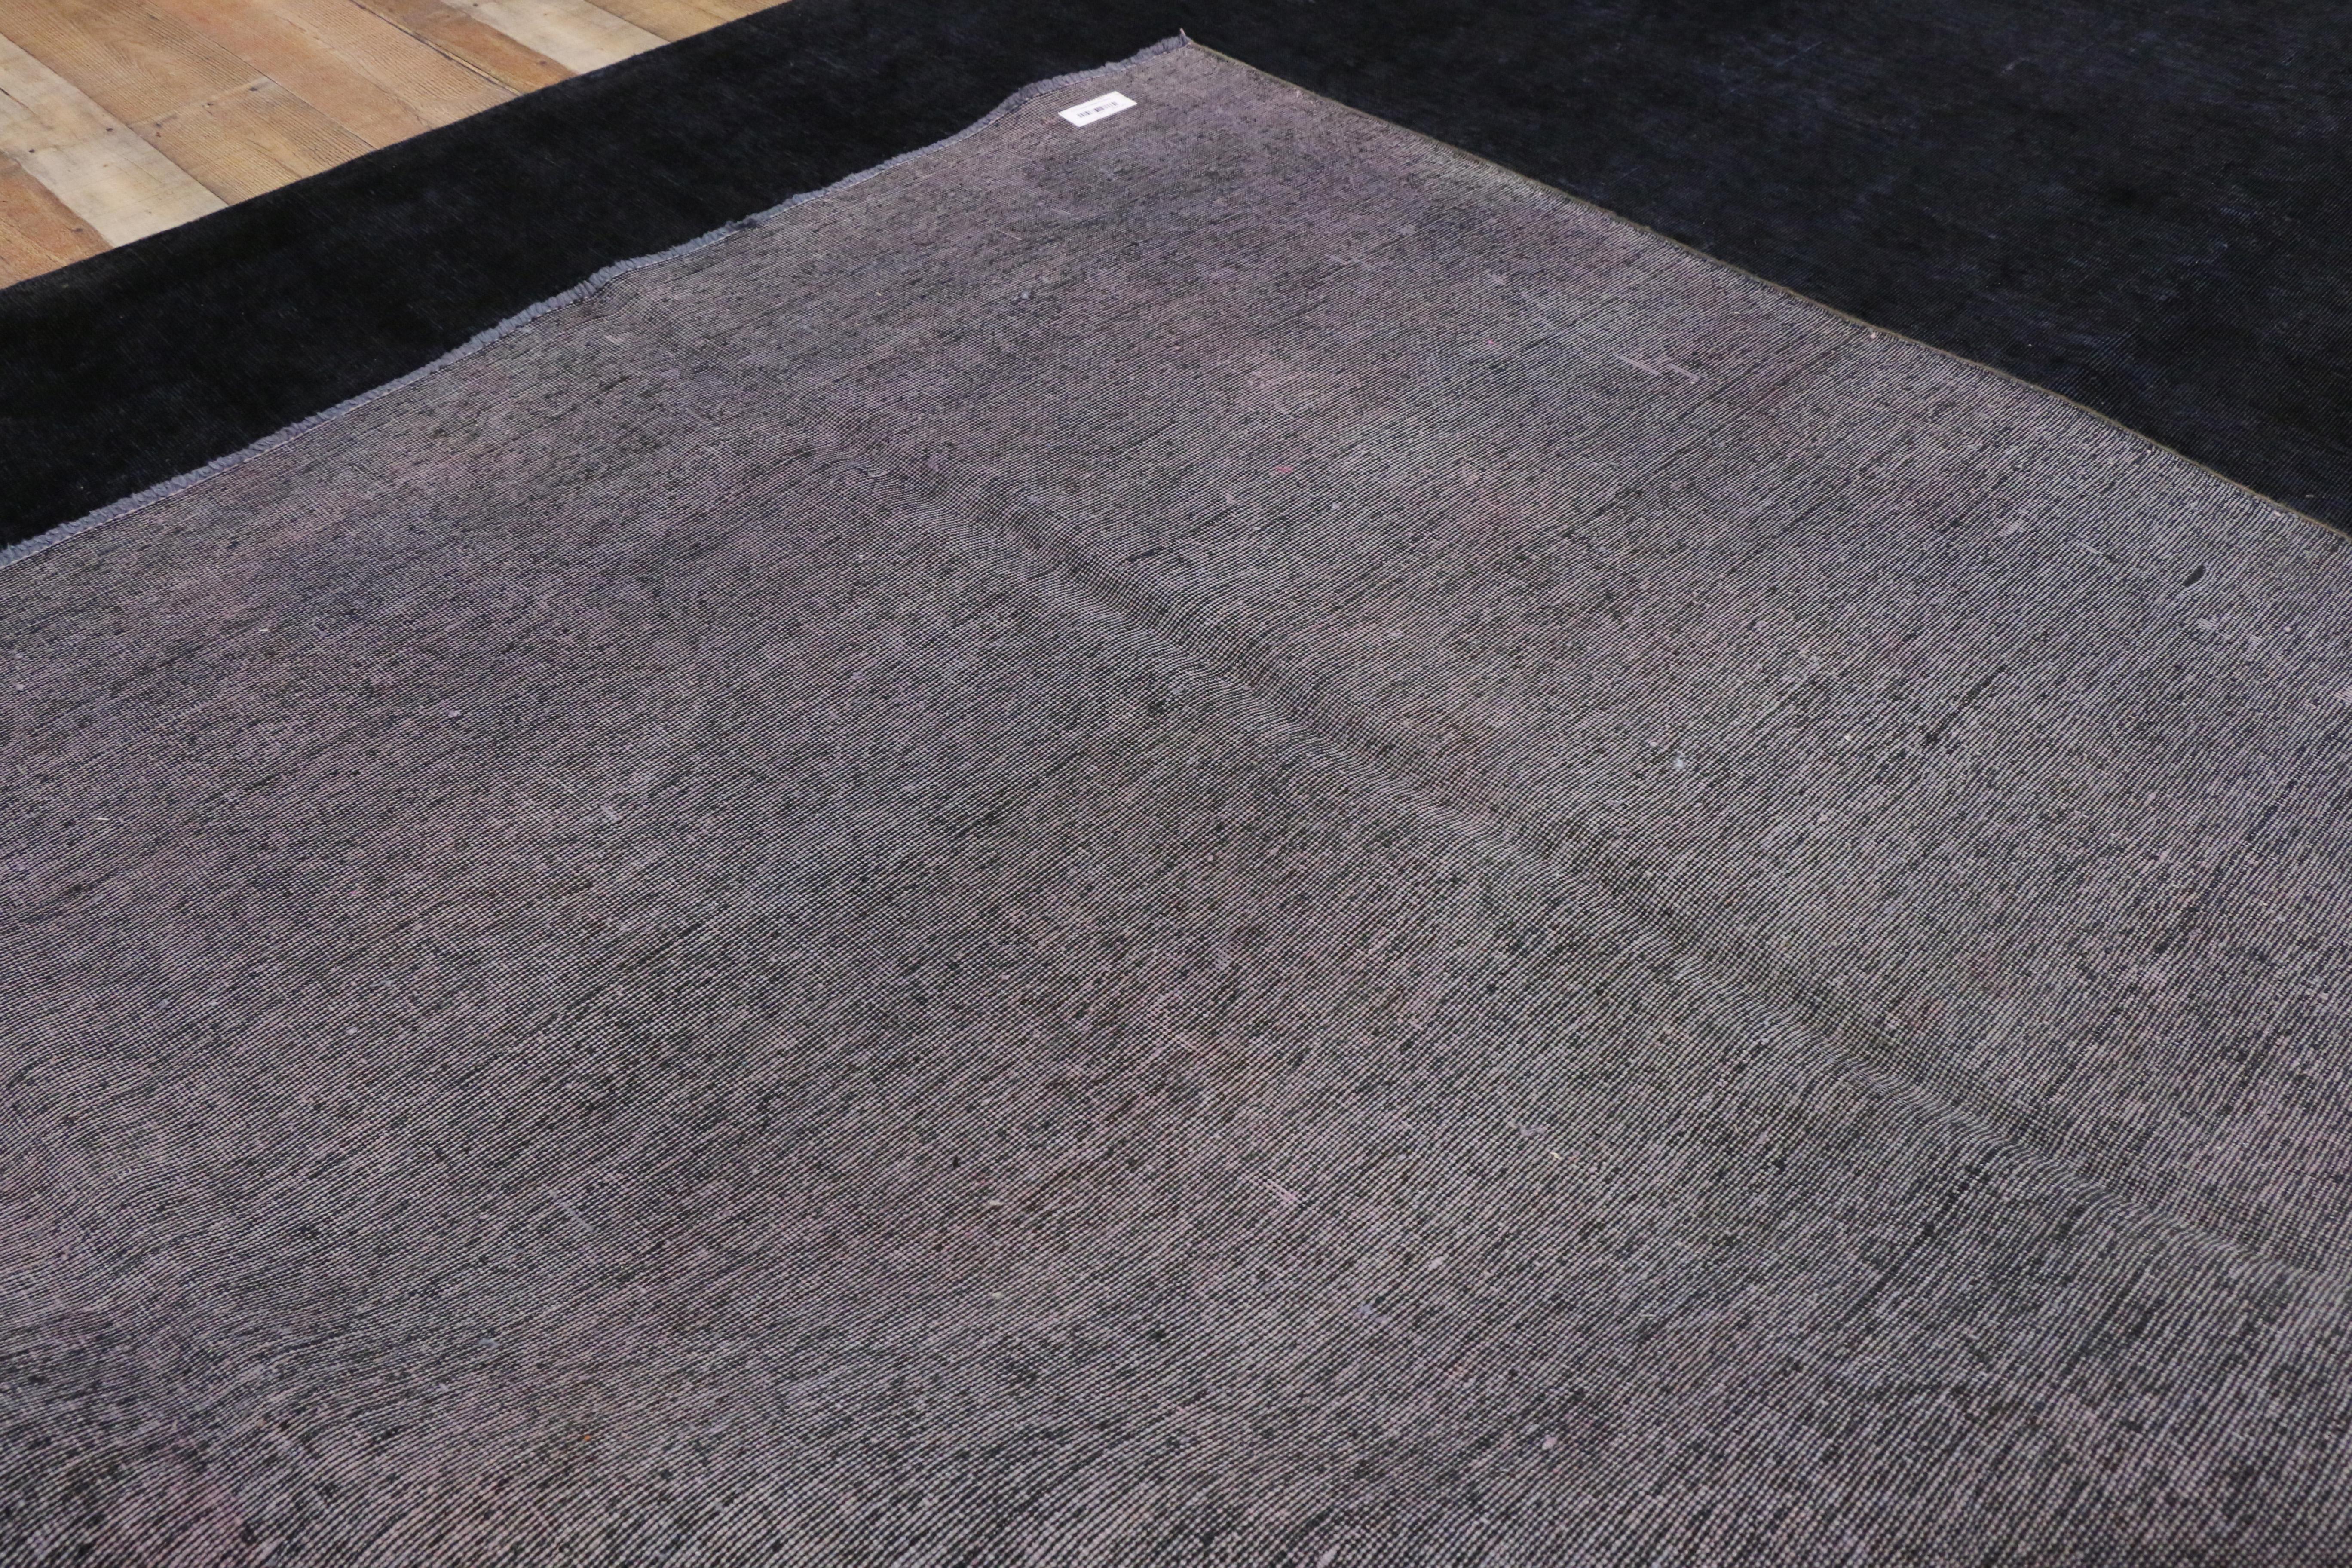 20th Century Distressed Vintage Overdyed Persian Rug with Luxe Steampunk Industrial Style